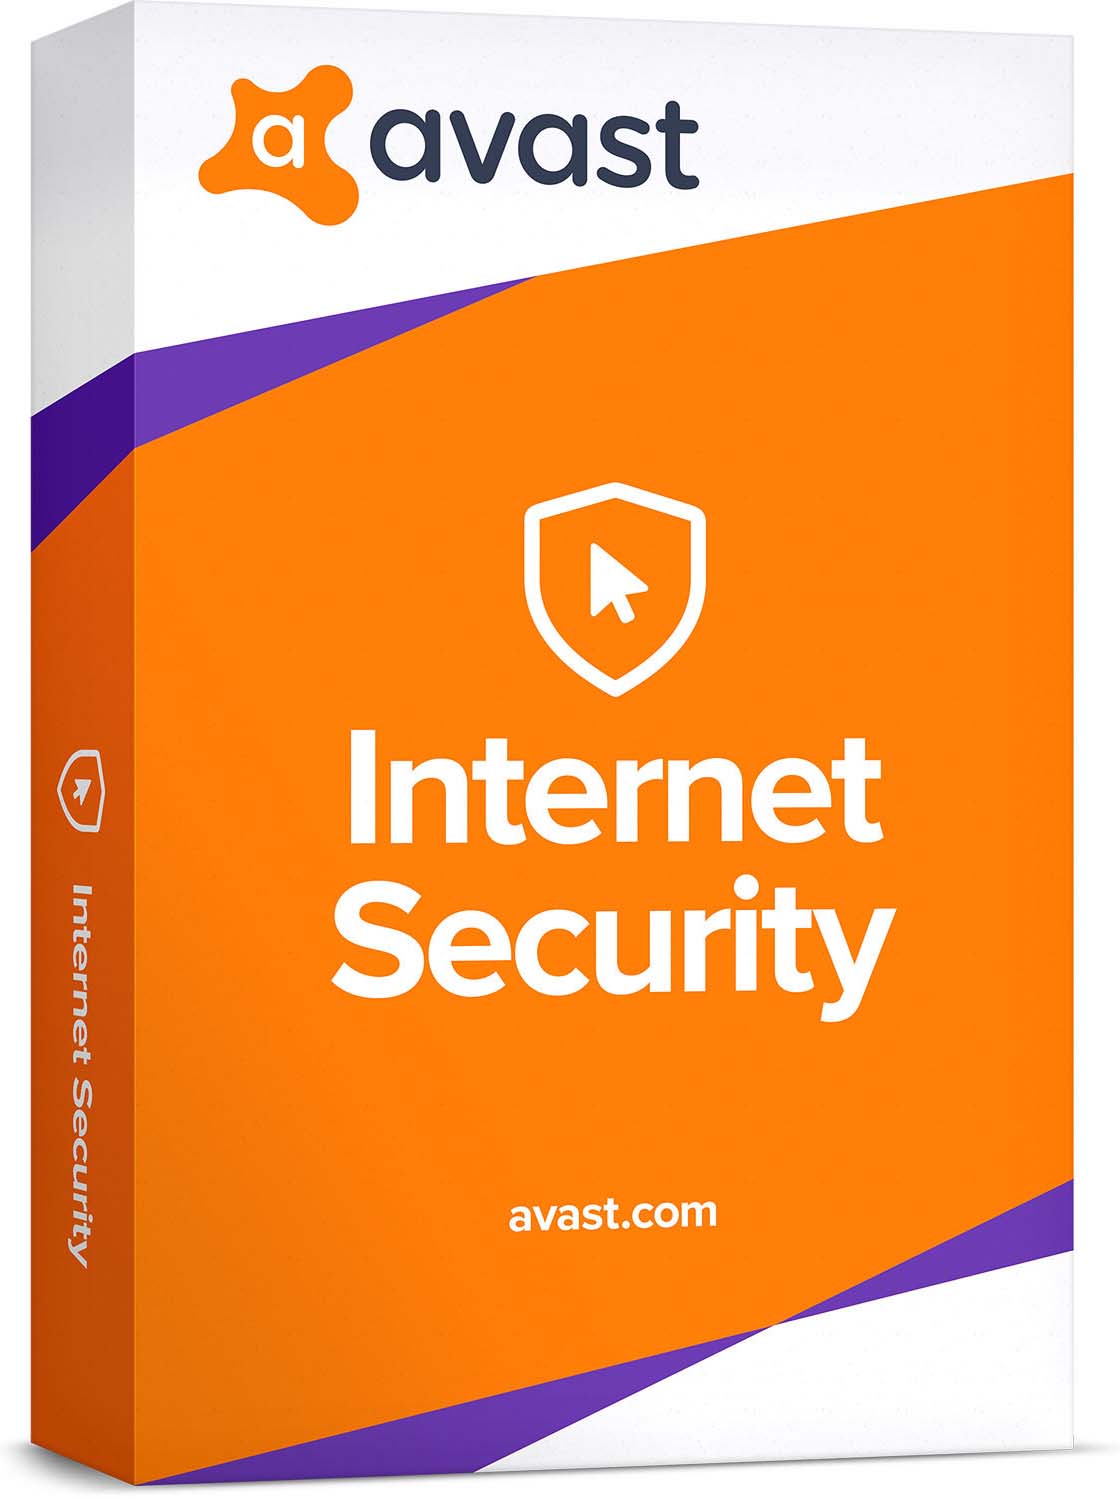 Avast Internet Security 2019 Activation Code Free for 1 Year